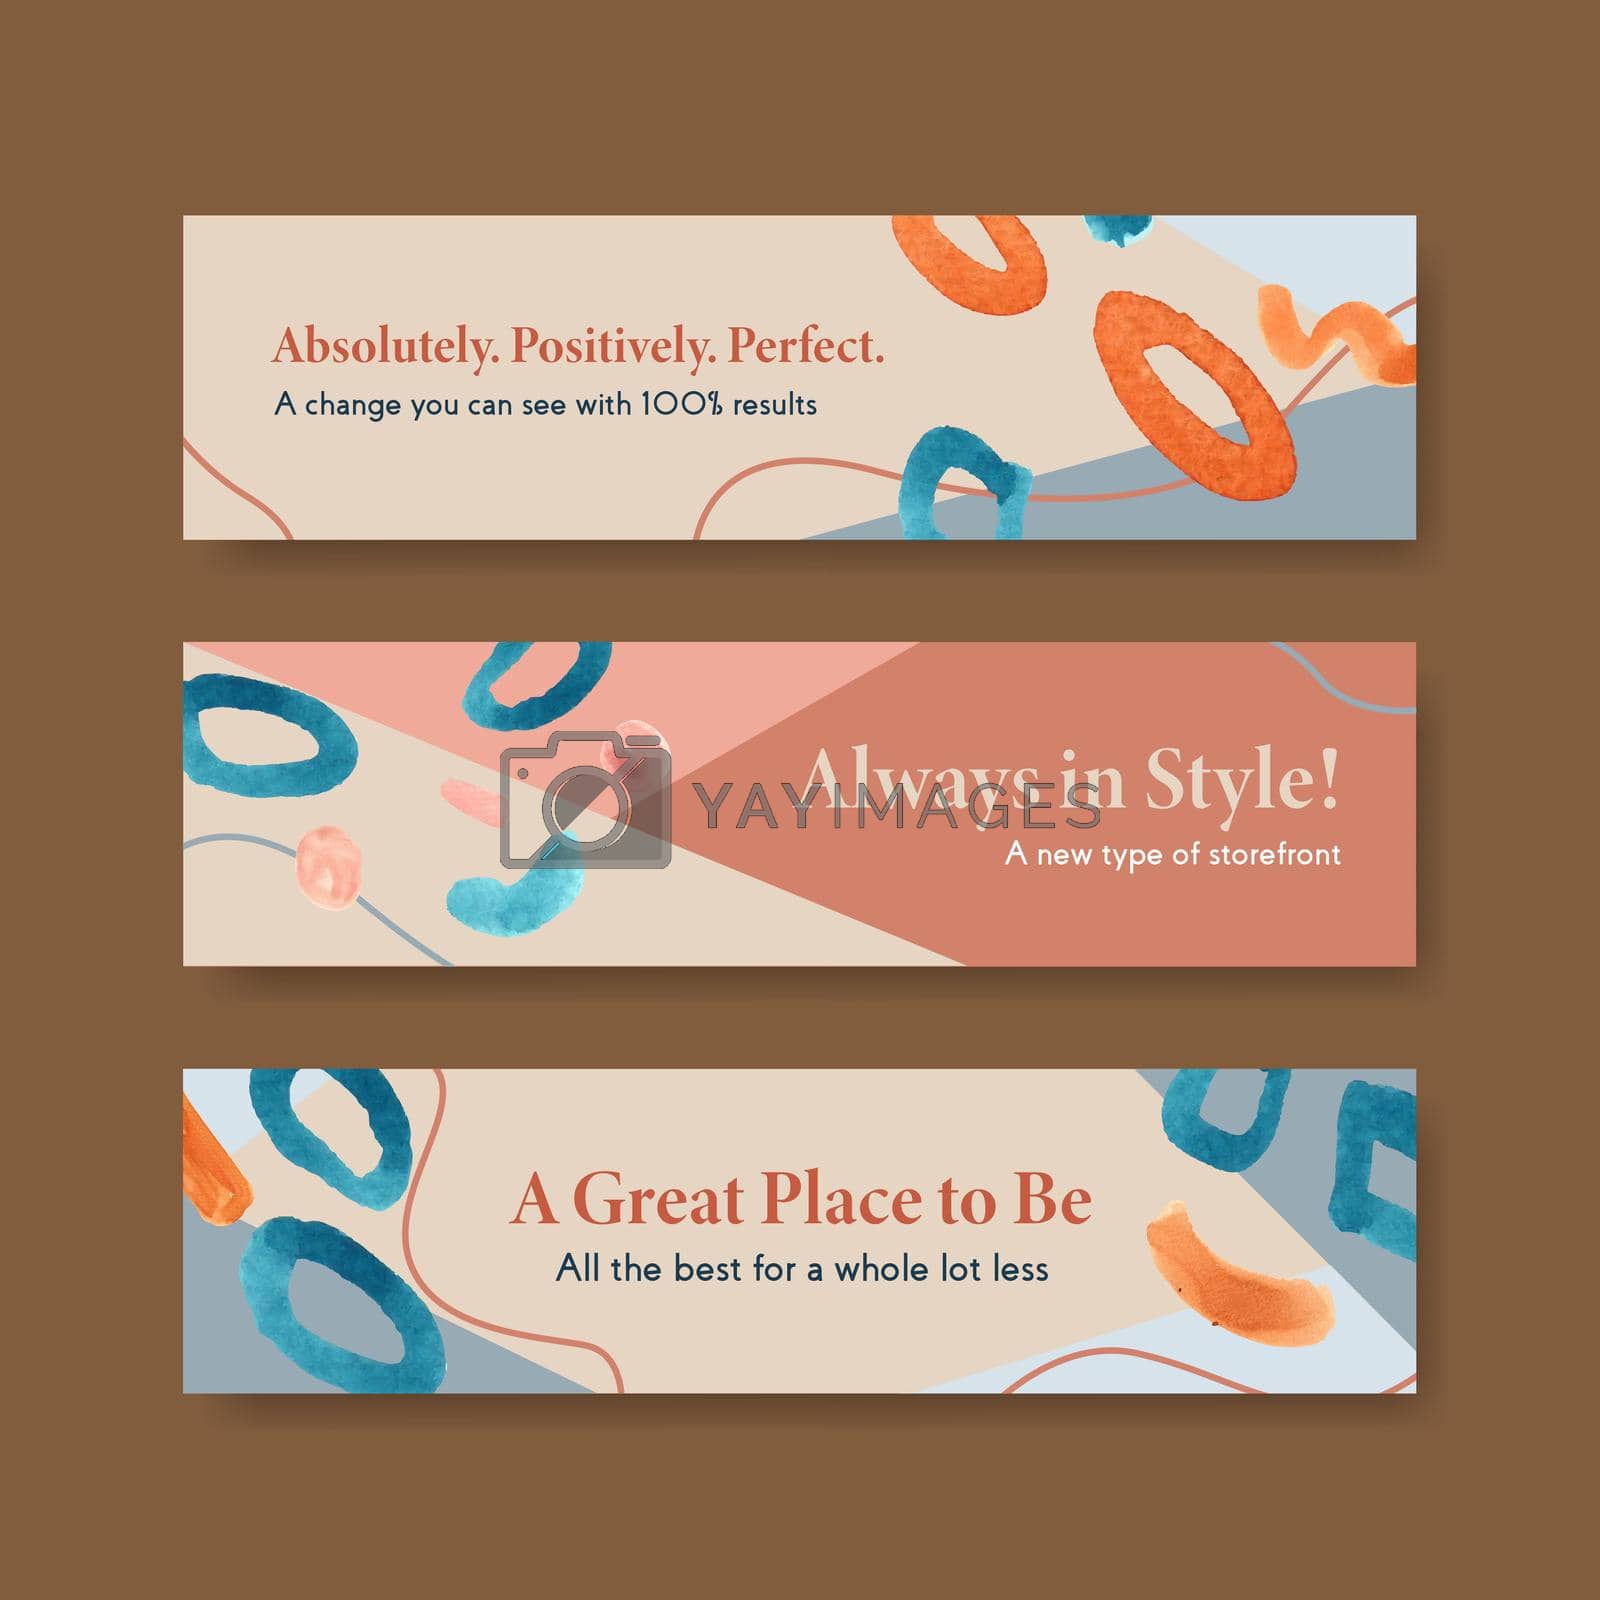 Royalty free image of Banner template with shopping design for leaflet and marketing watercolor illustration by Photographeeasia